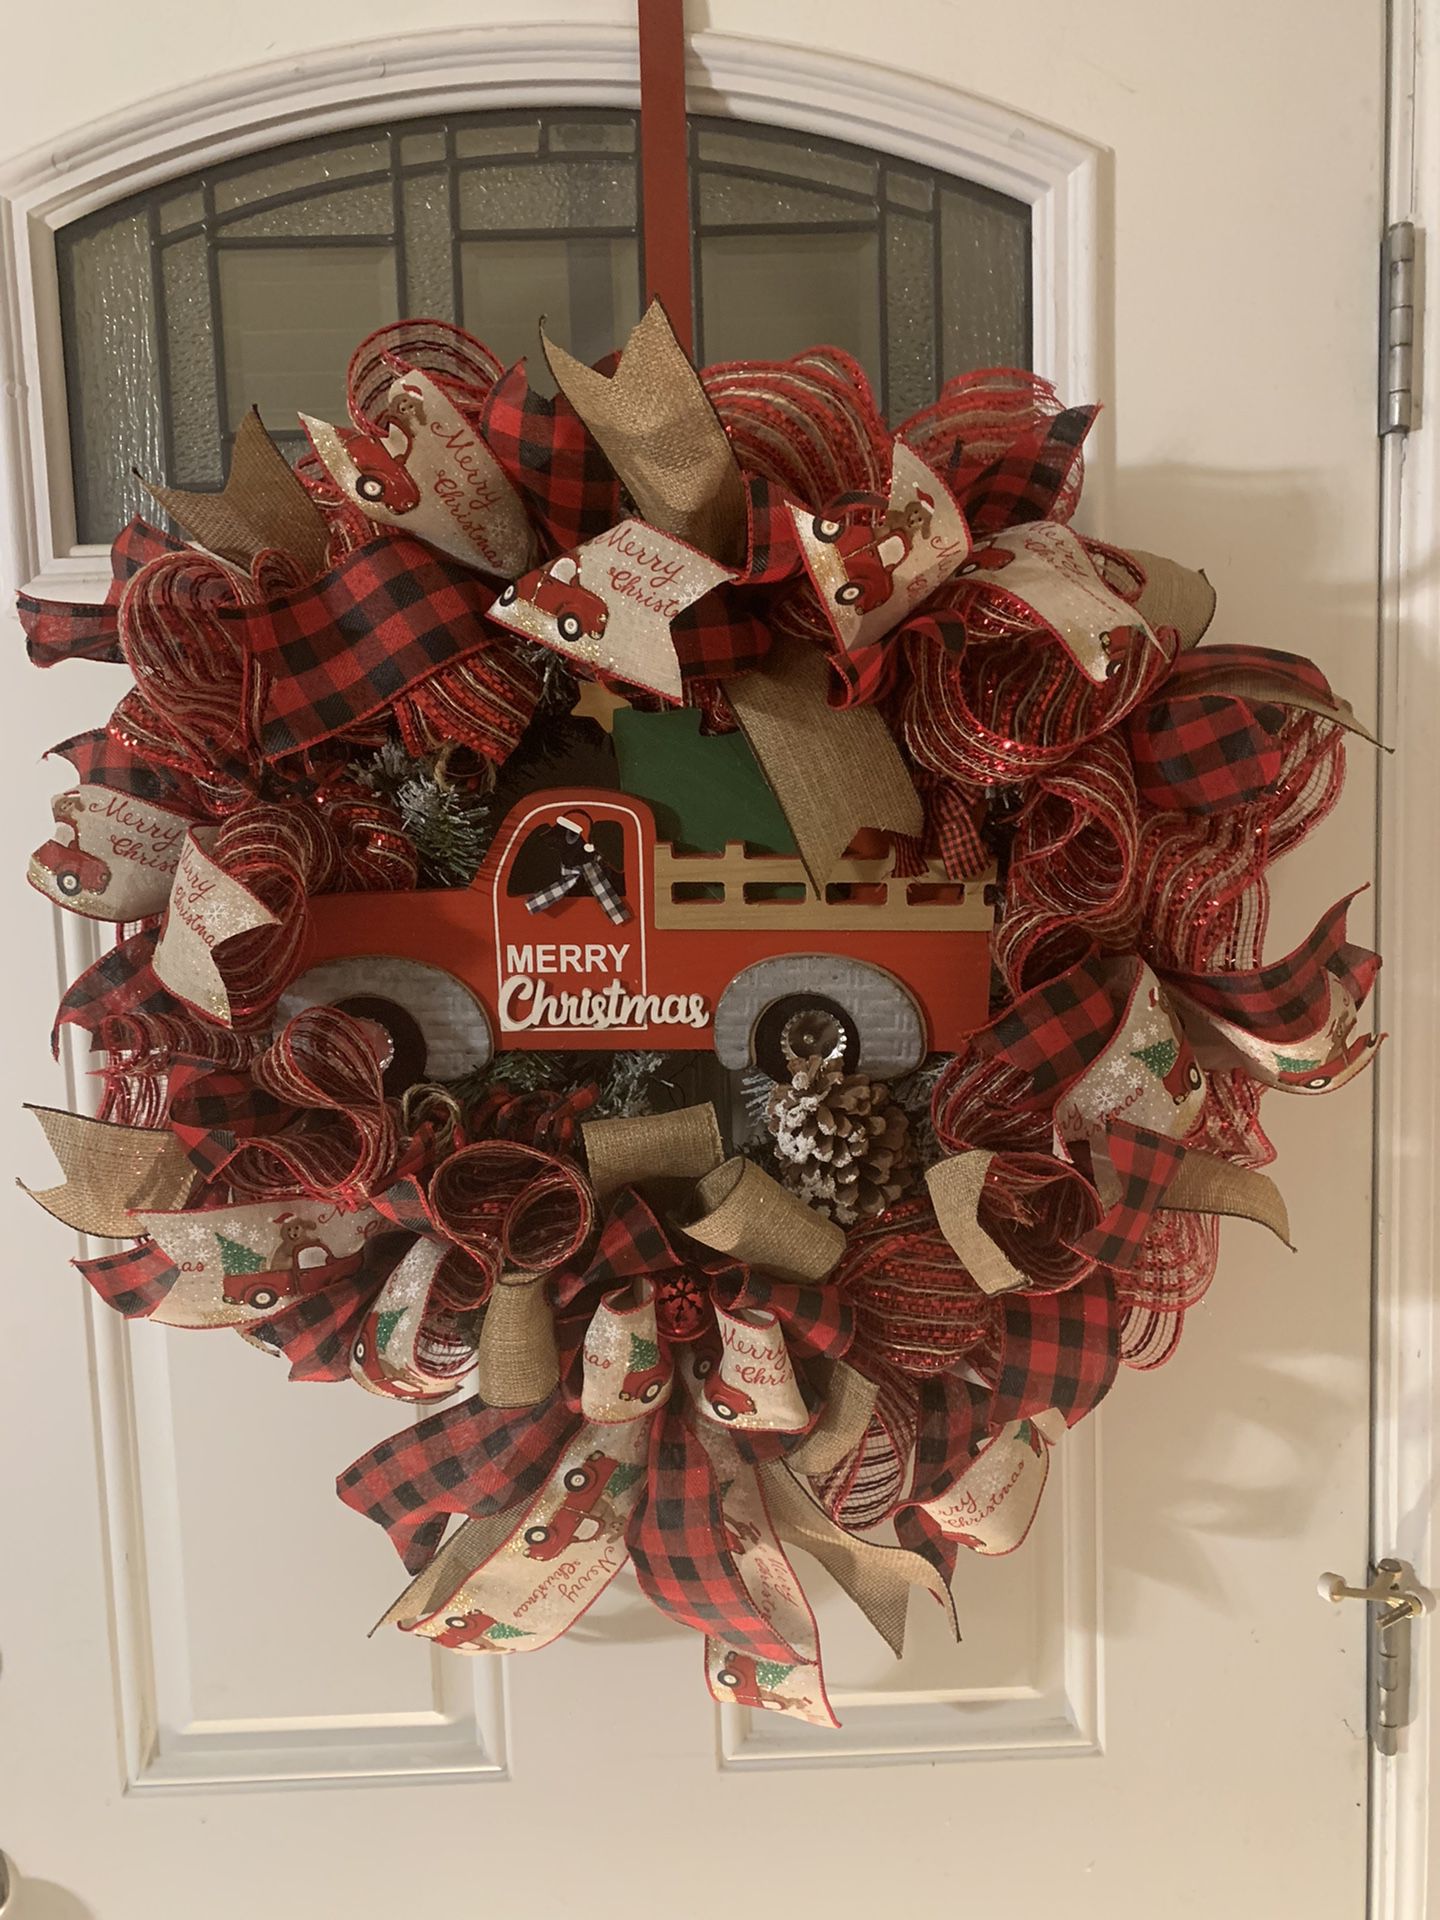 Holiday Wreaths -$25 to $89 - Prices listed In Ad